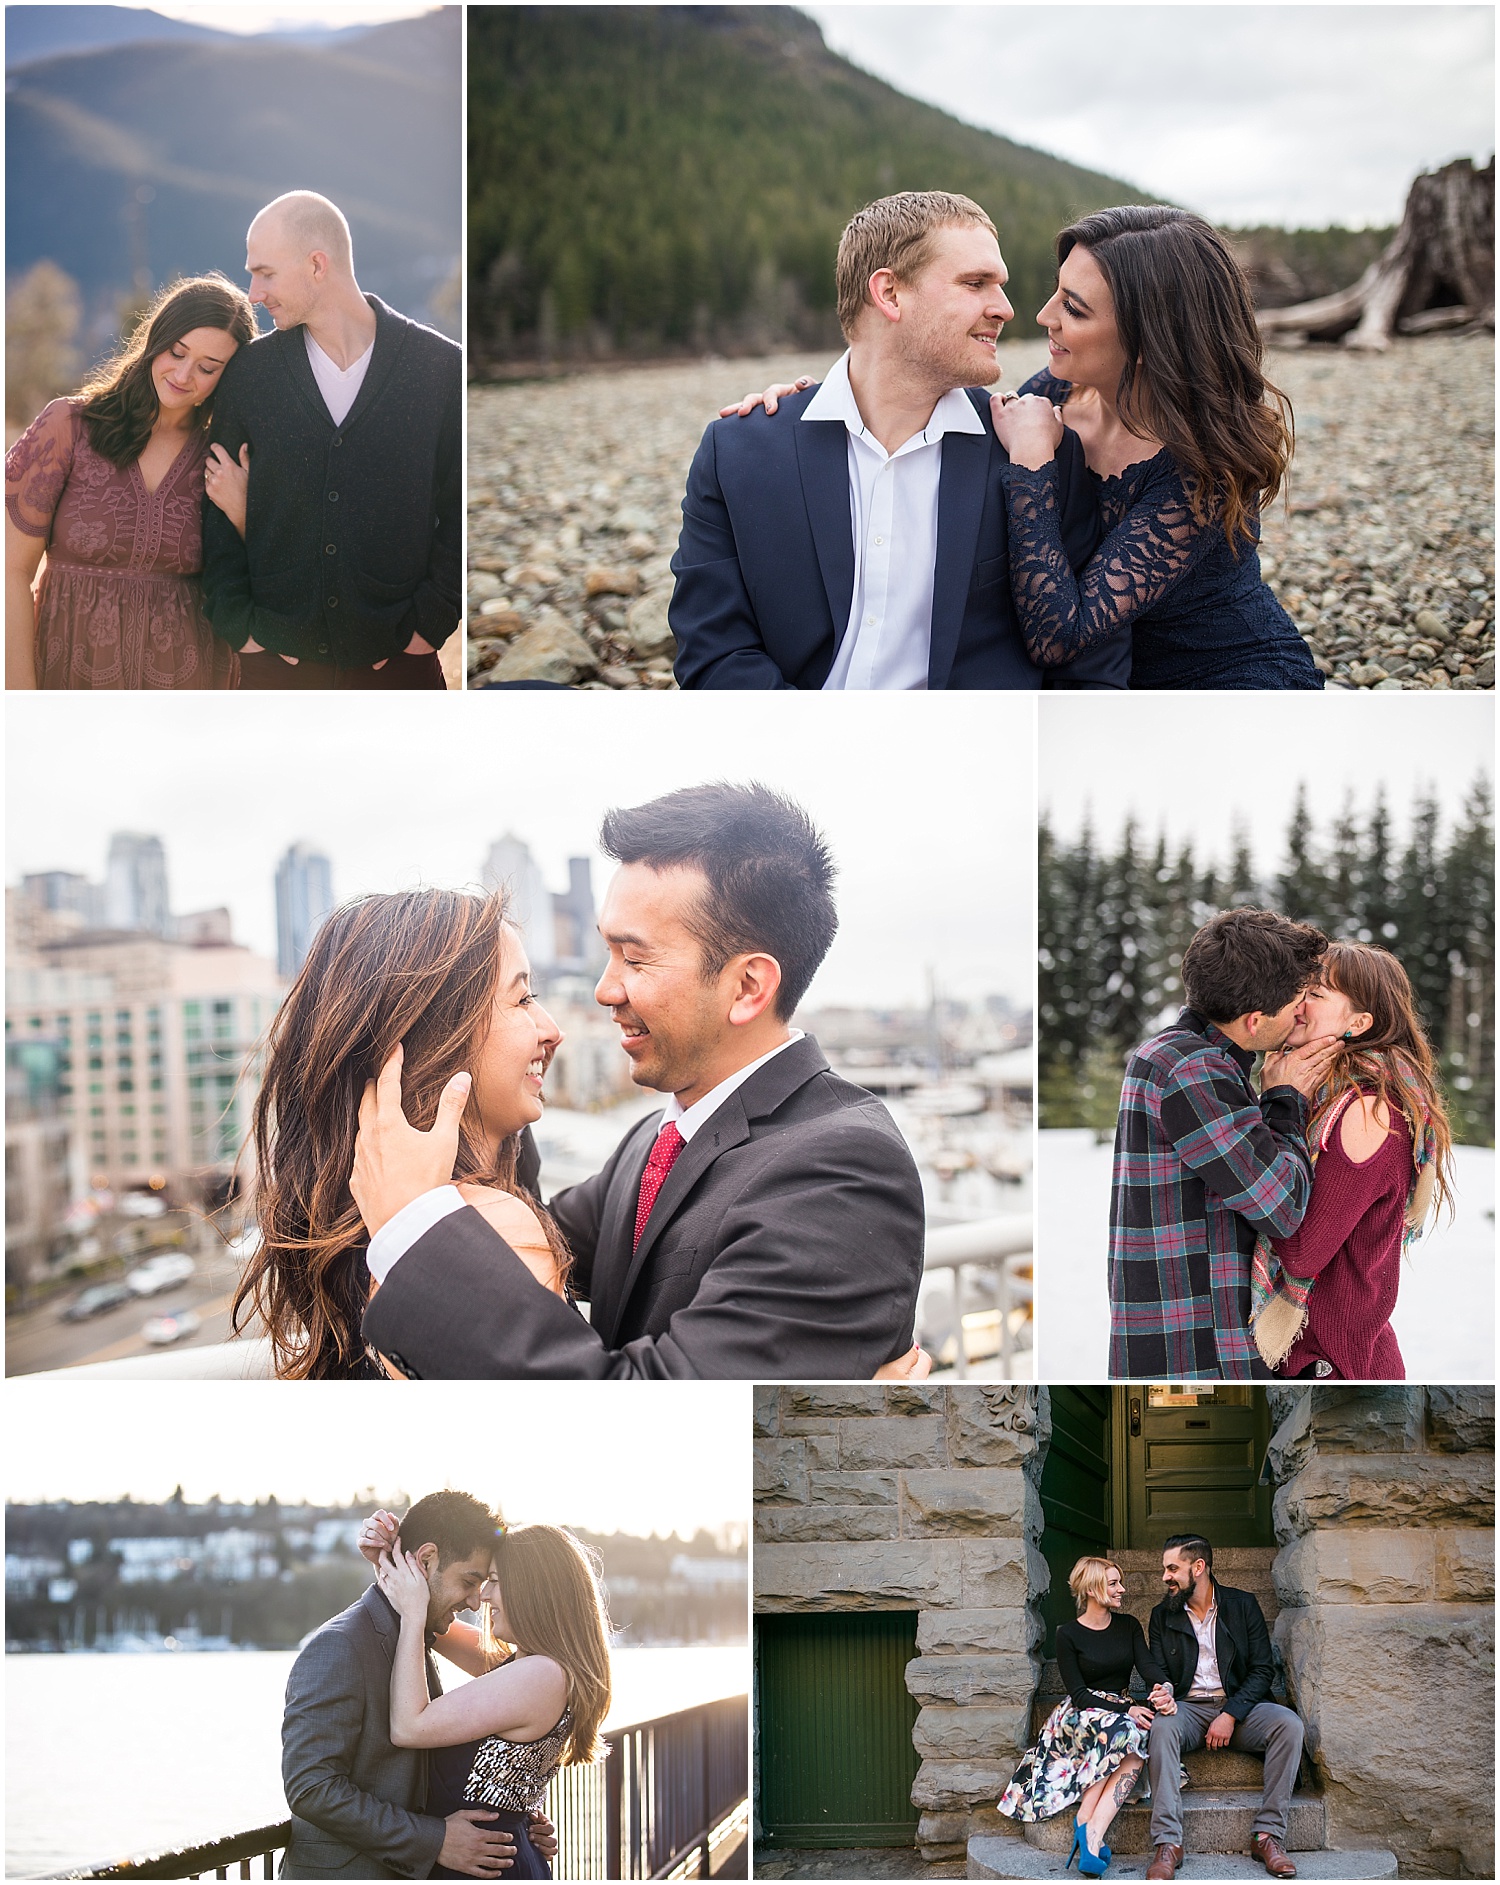 Style tips for amazing engagement pictures: outfit ideas.